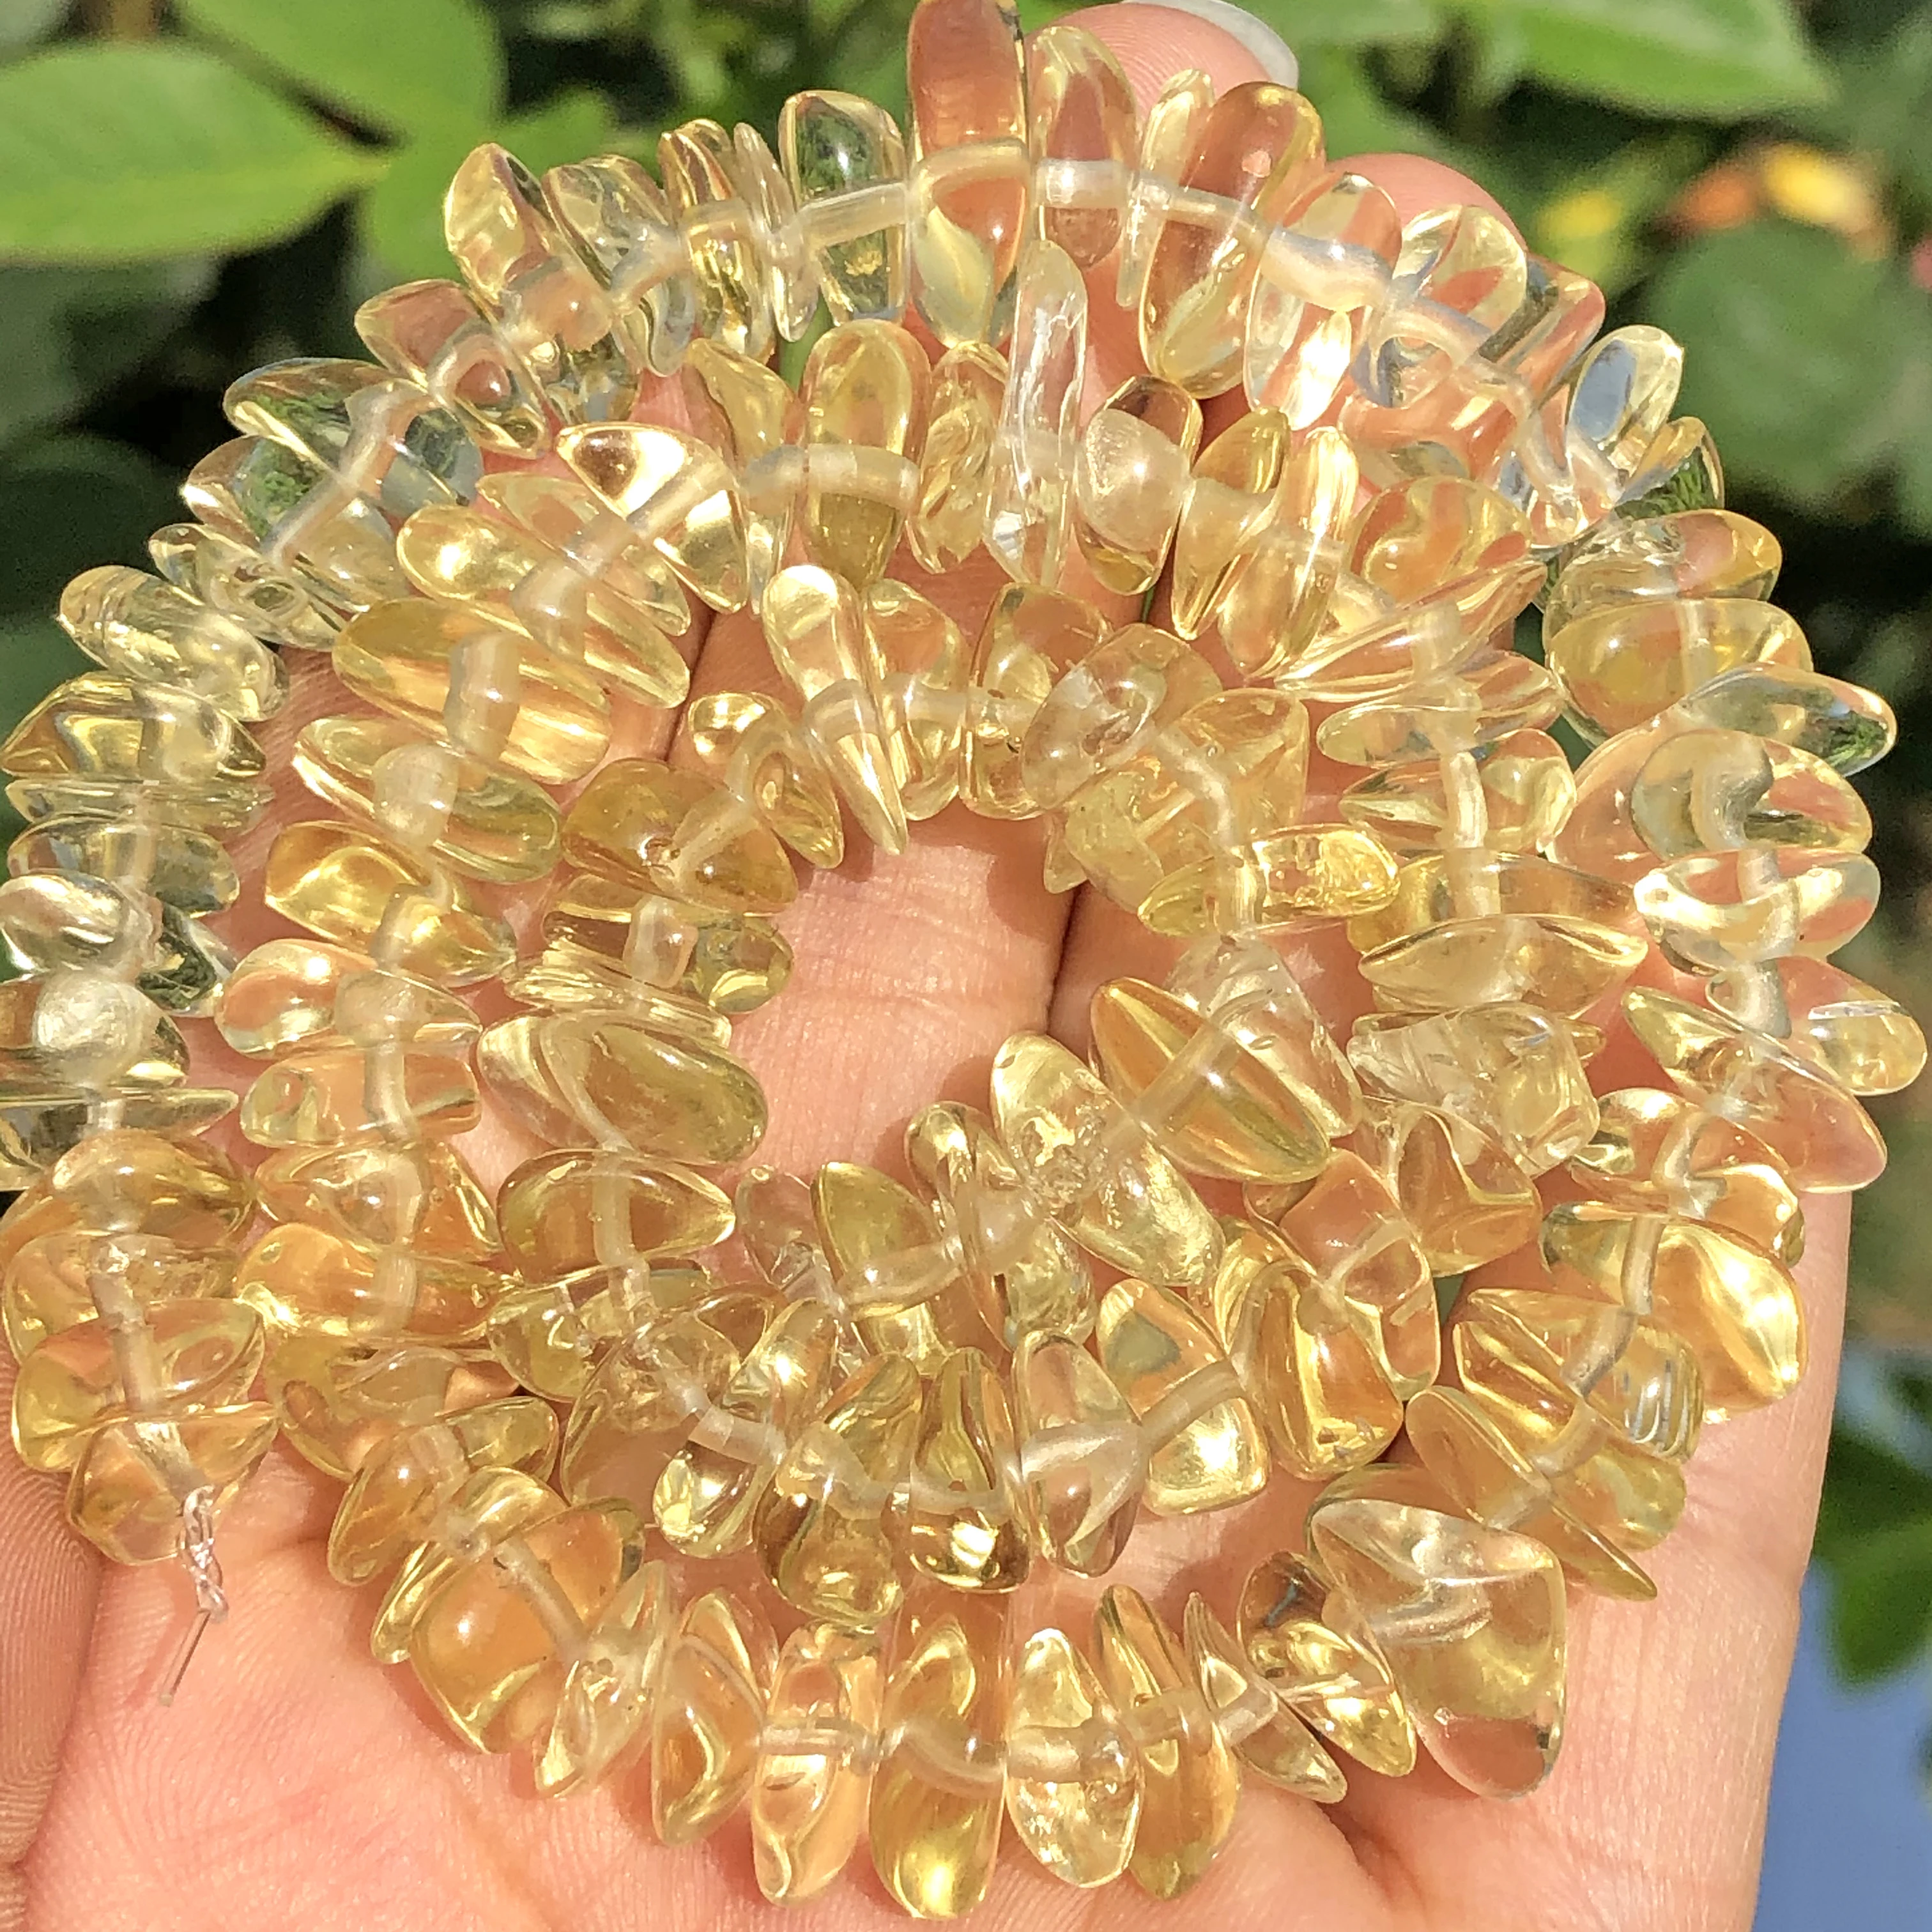 8-12mm Natural Chips Yellow Citrines Crystal Stone Flat Irregular Spacer Beads For Jewelry Making Beadwork DIY Bracelet Necklace